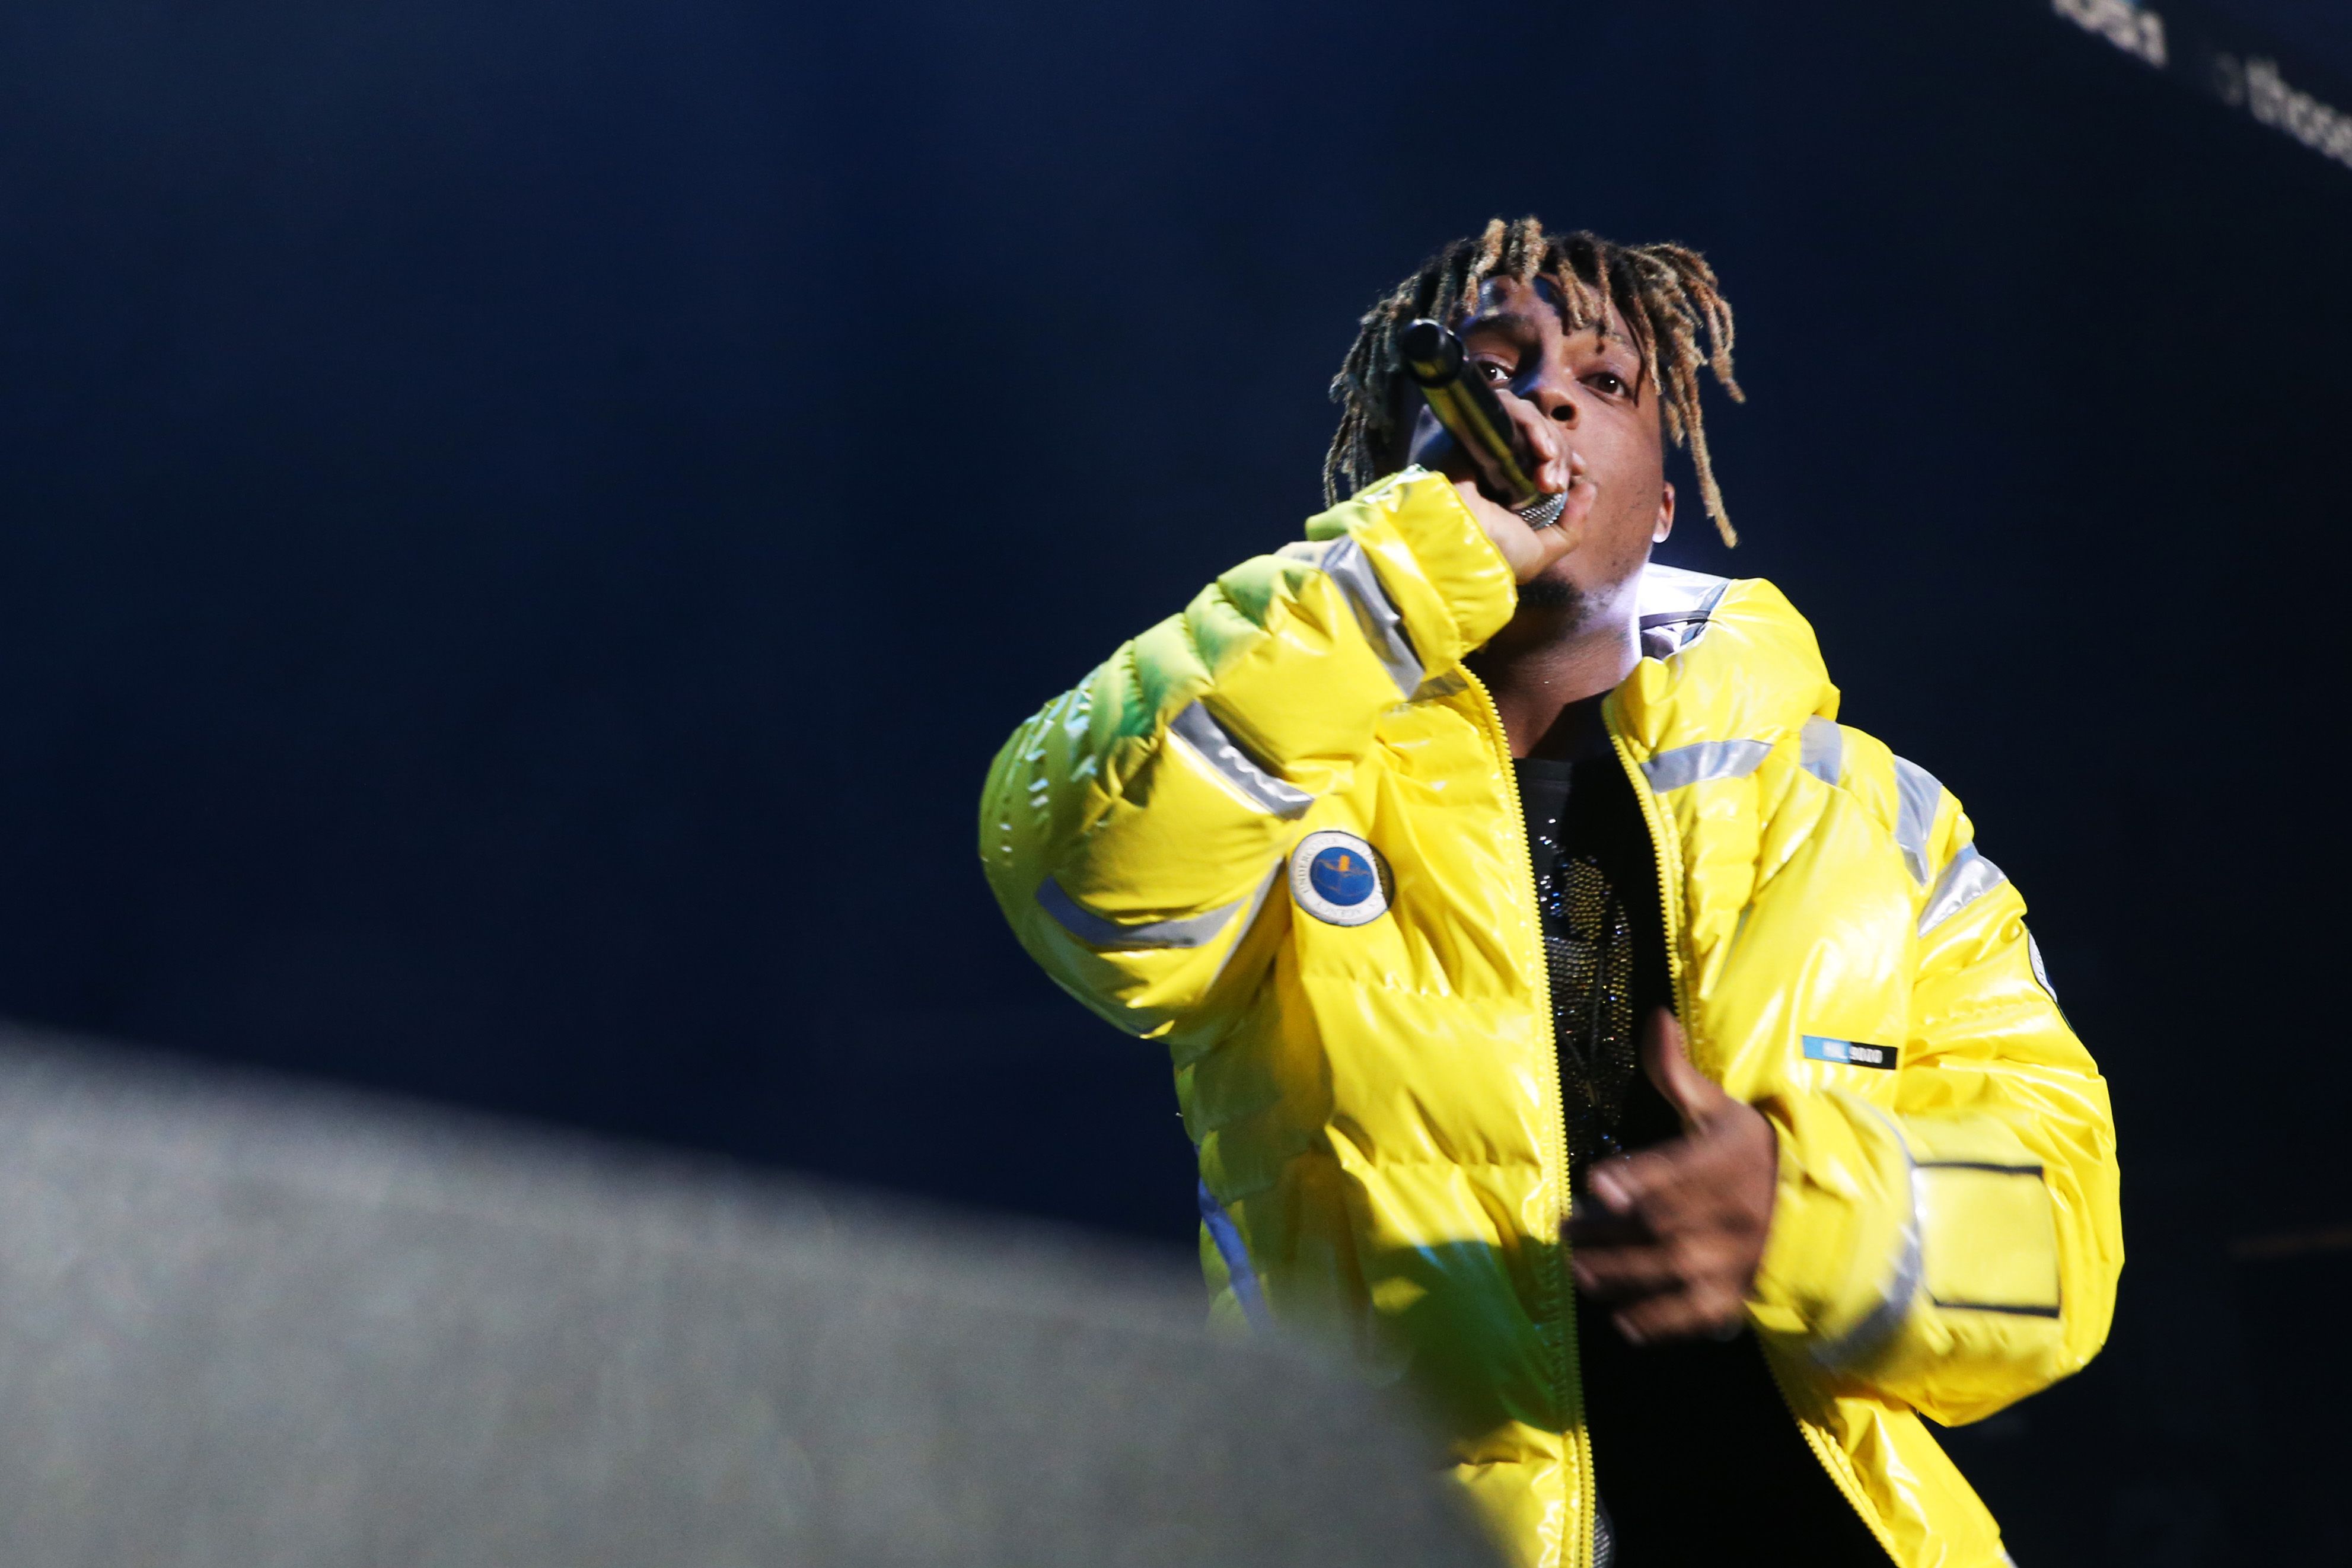 Rapper Juice WRLD's song 'Righteous' released after his death